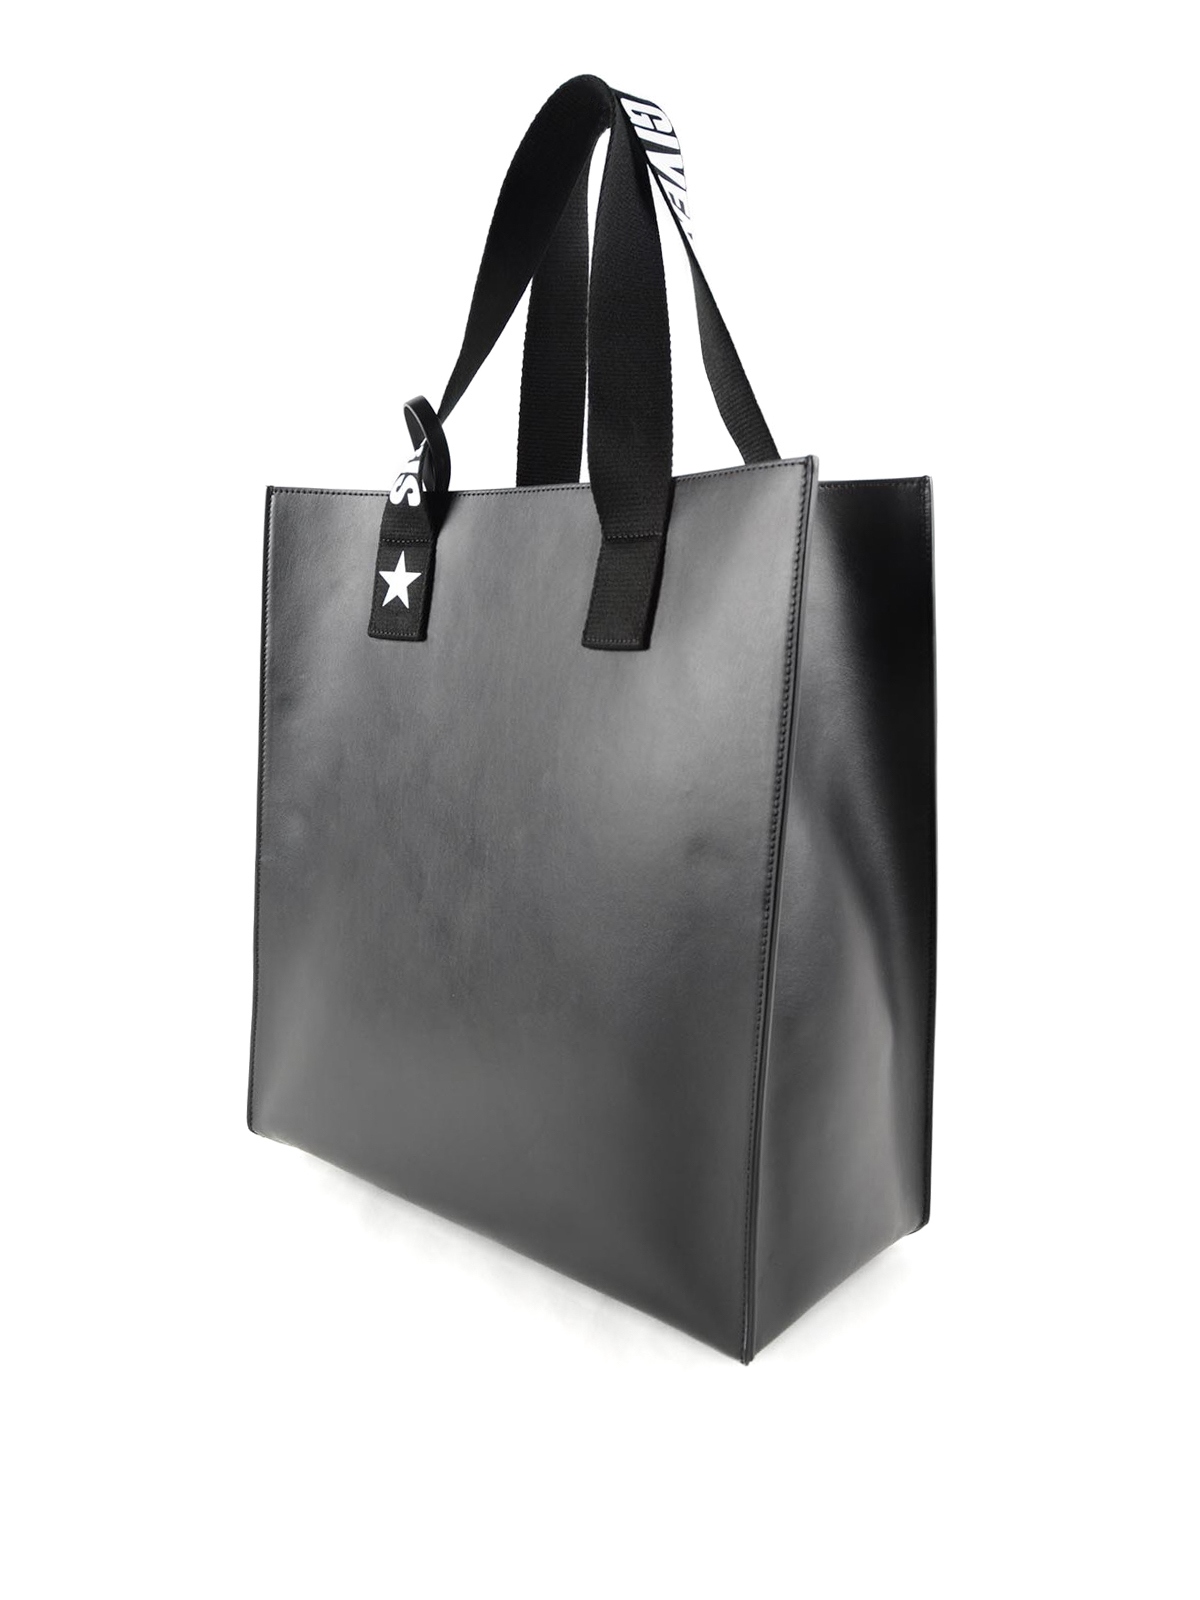 givenchy stargate tote